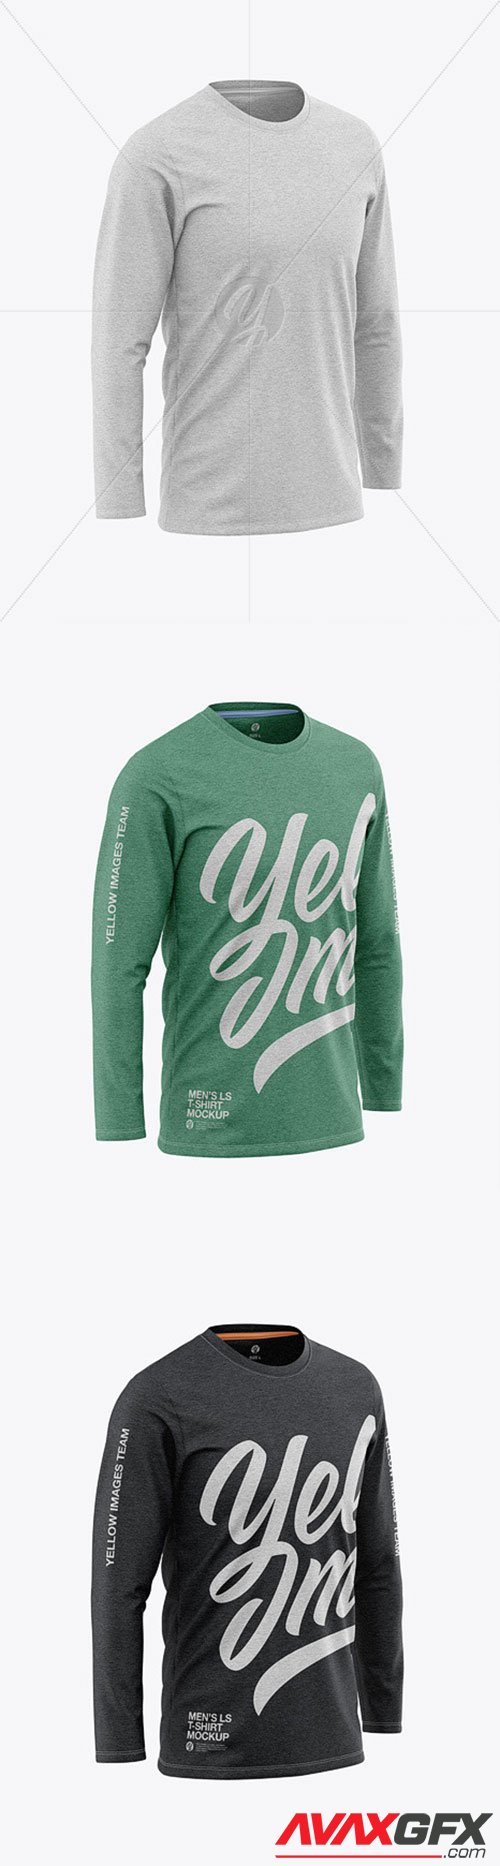 Download Men's Heather Long Sleeve T-Shirt Mockup - Front View ...